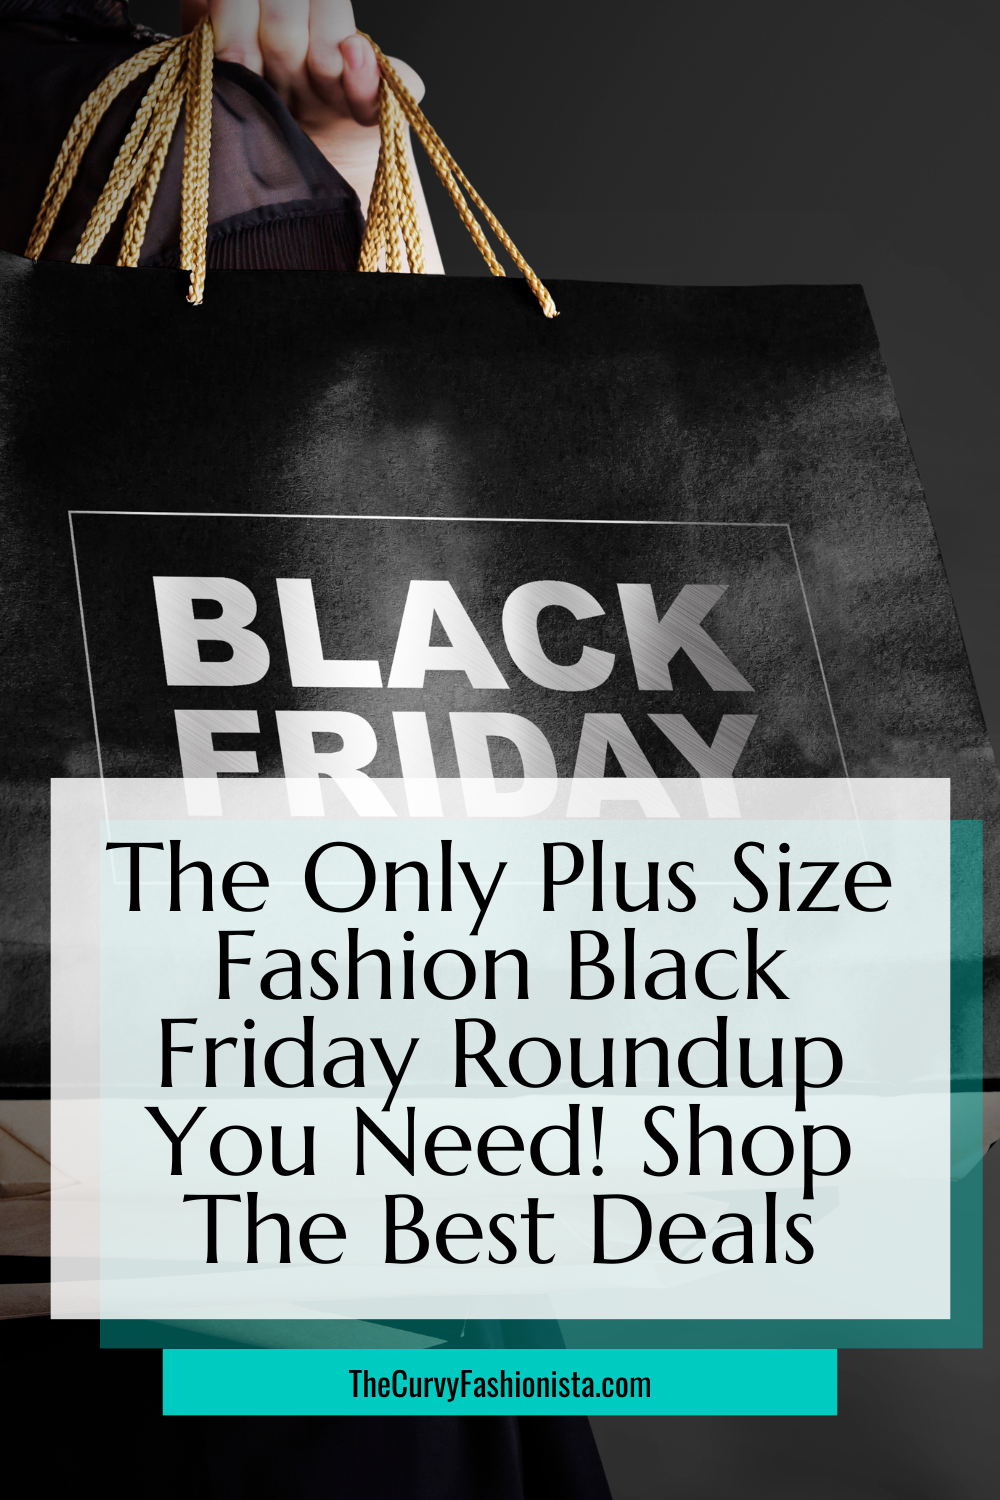 The Only Plus Size Fashion Black Friday Roundup You Need! Shop The